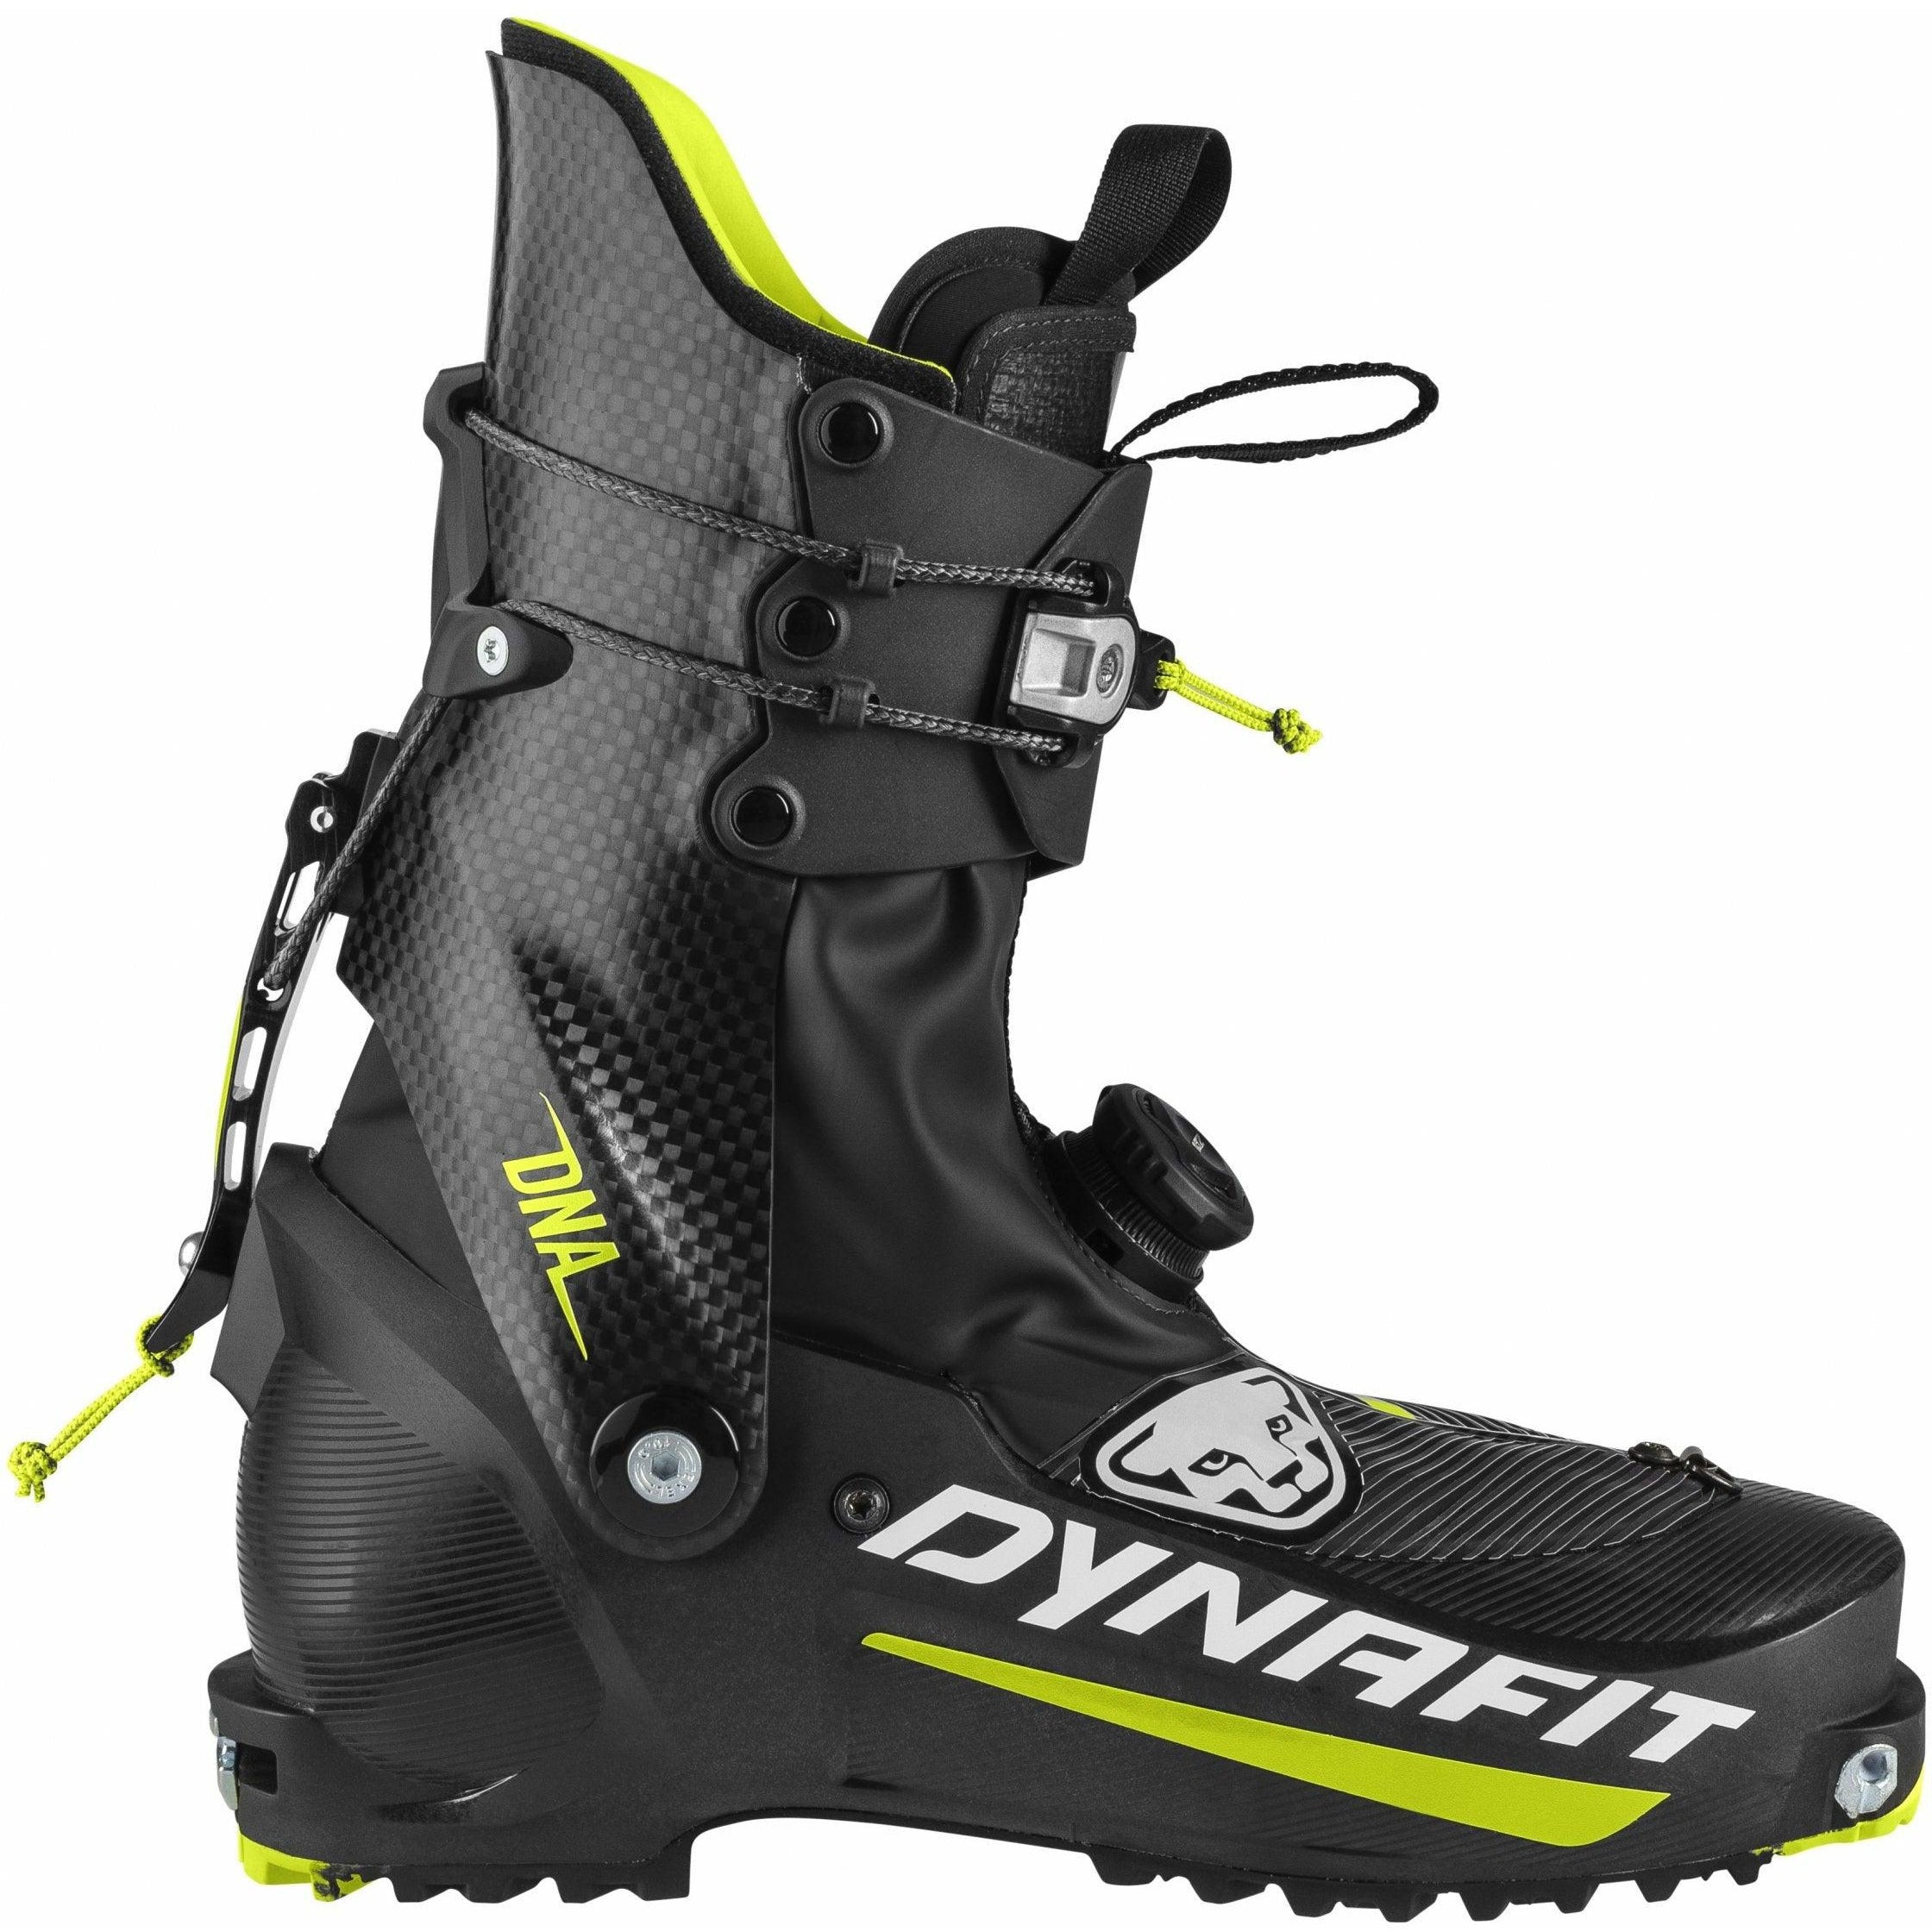 Dynafit TLT Speedfit Ski Touring Boot Review: Good for Ice Climbs?